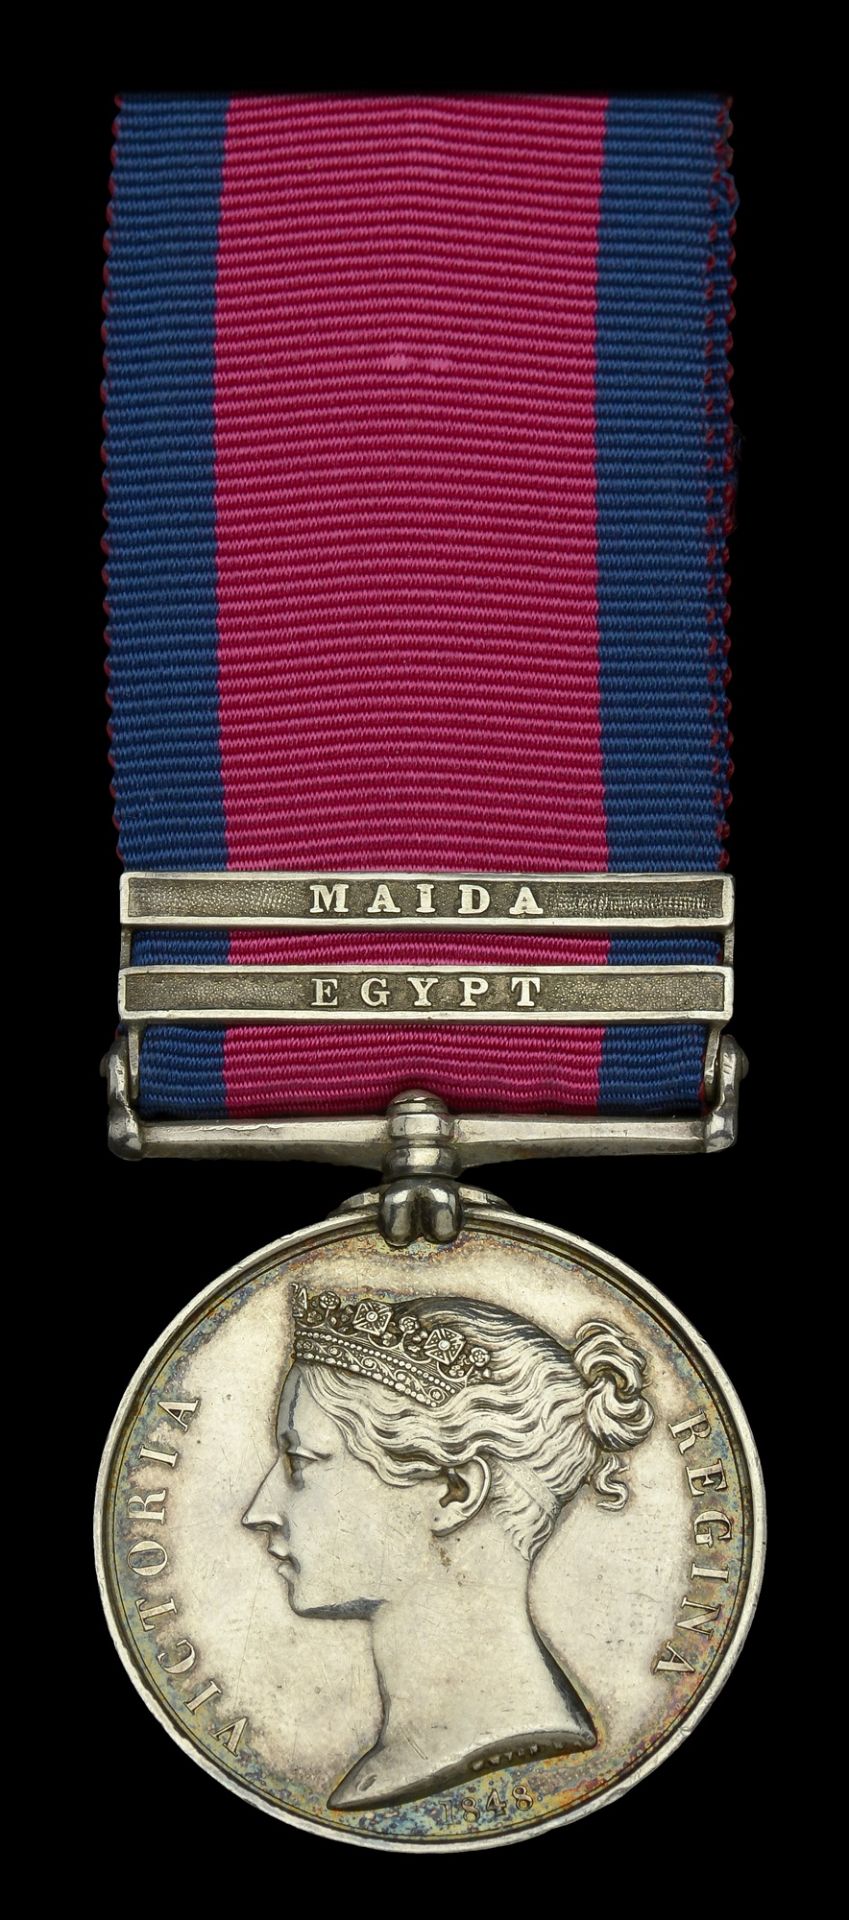 Single Campaign Medals